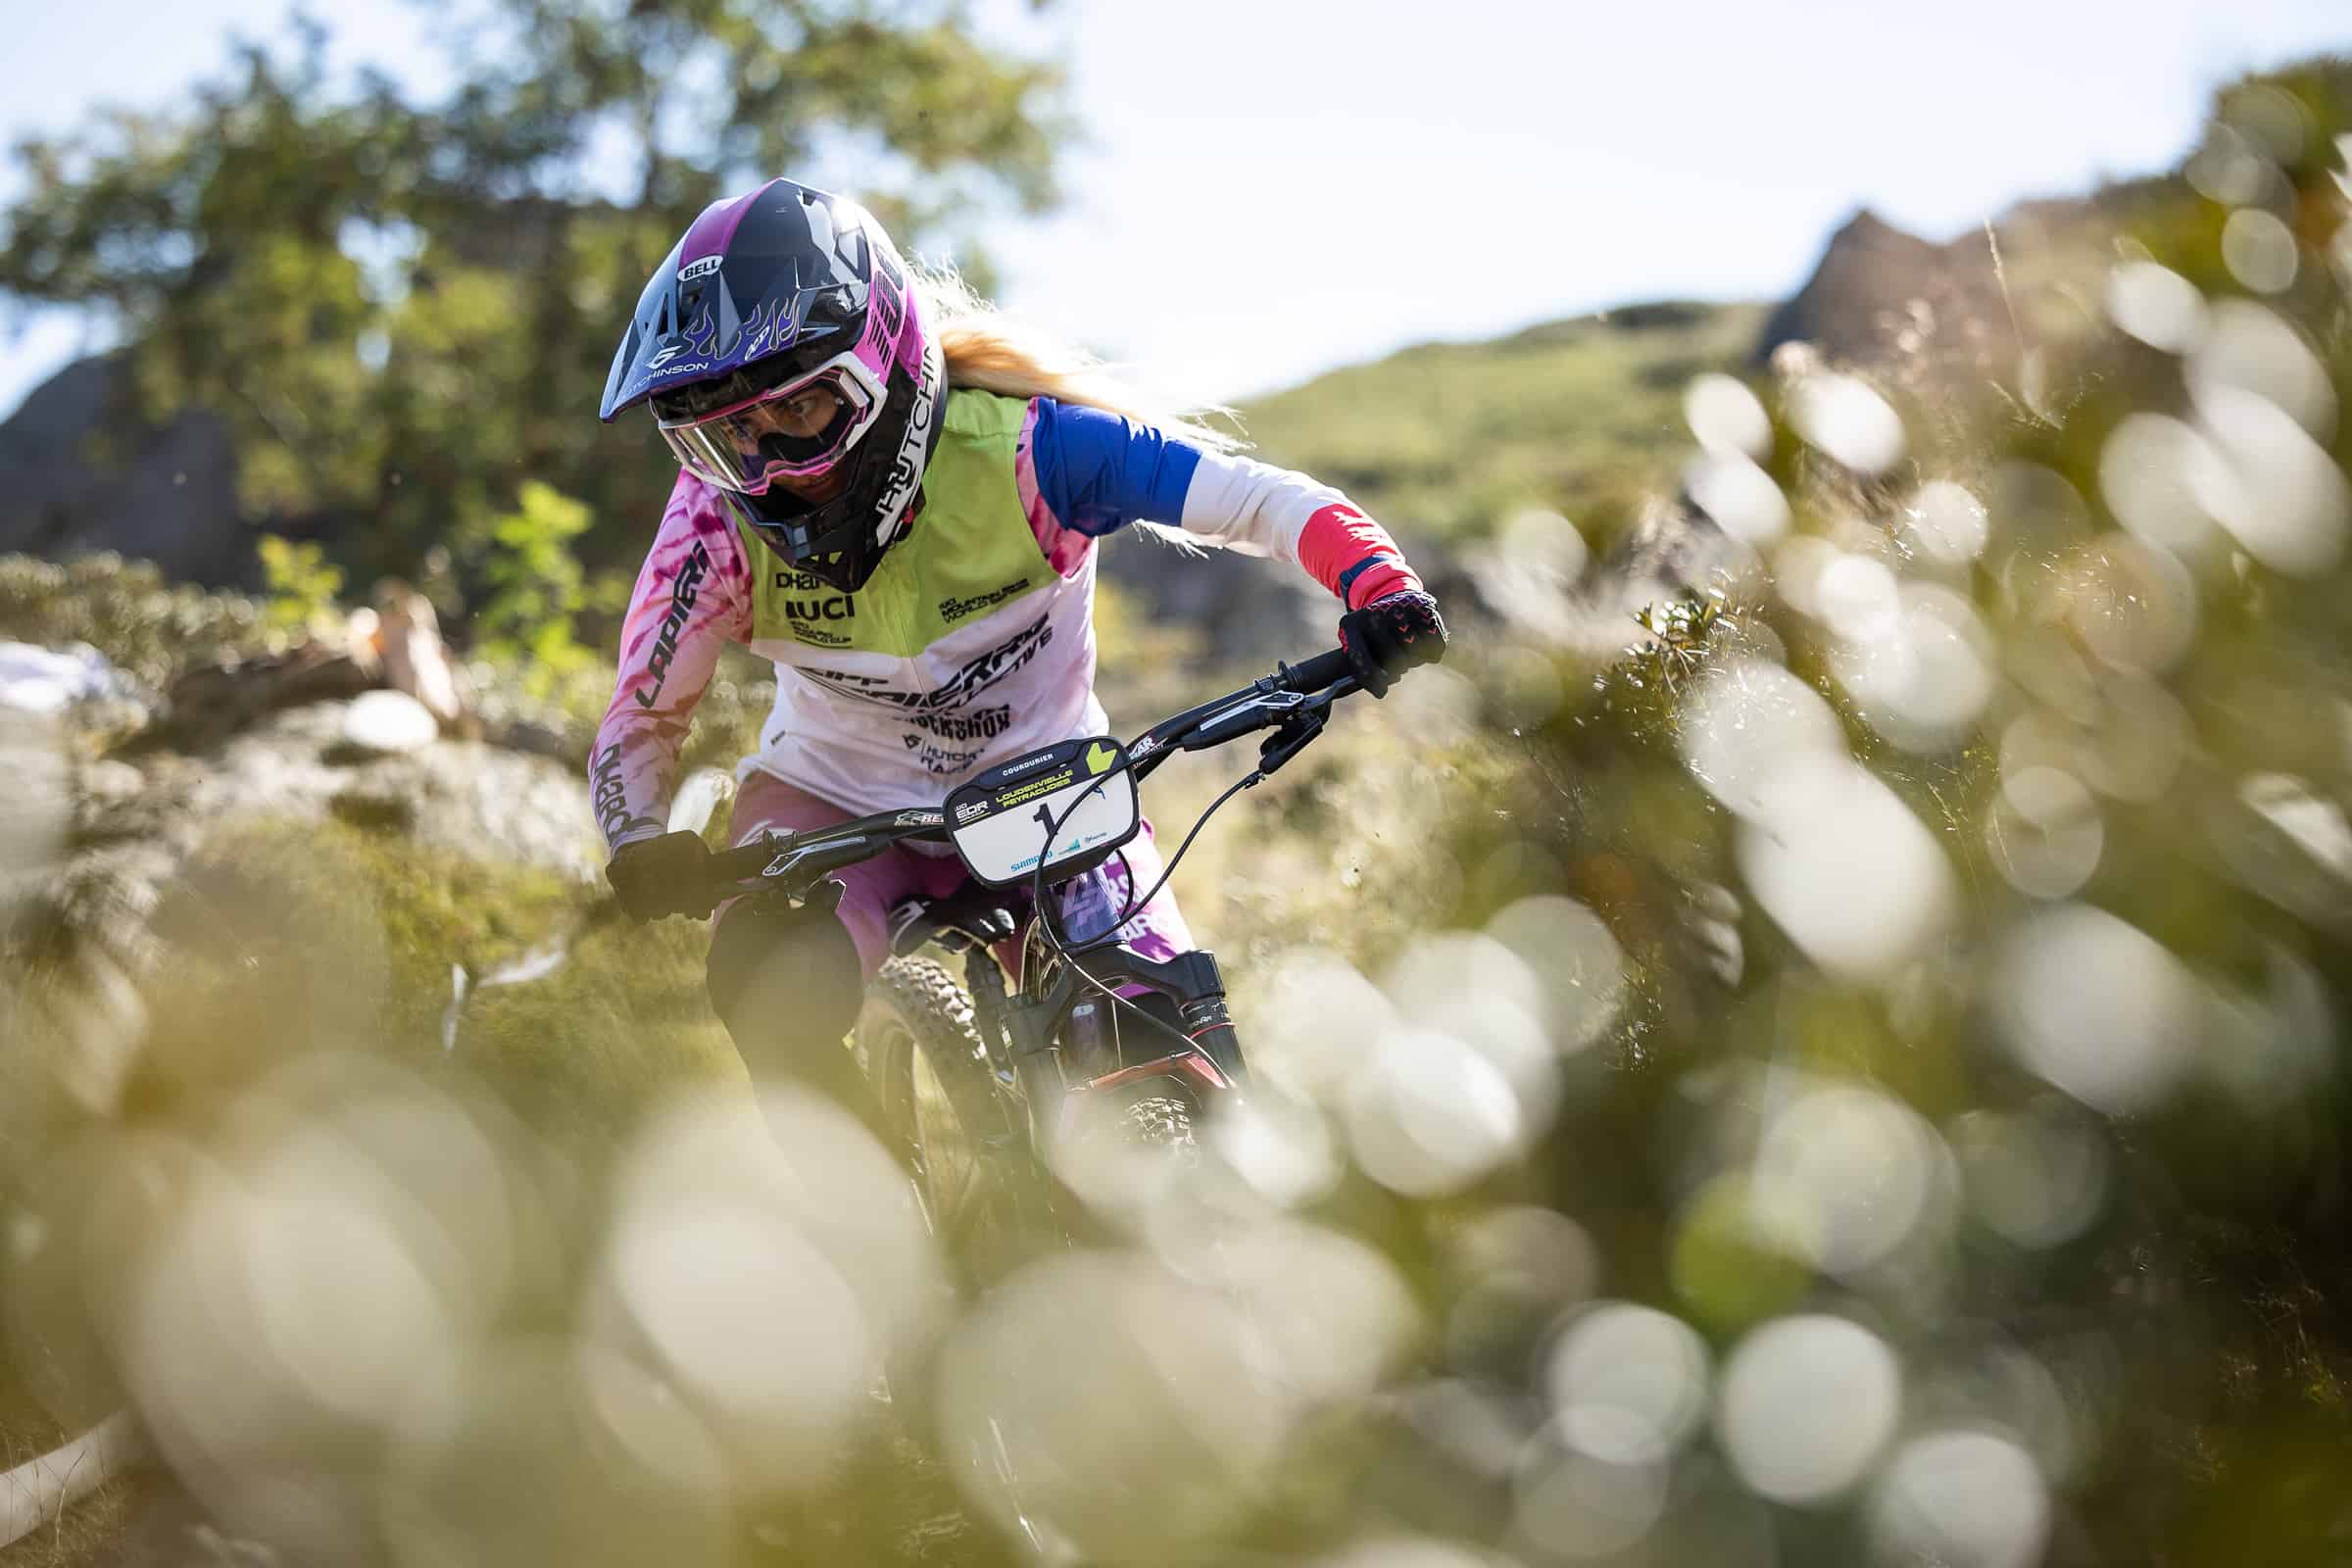 Two more UCI Mountain Bike World Cups to come in Haute-Savoie, France 